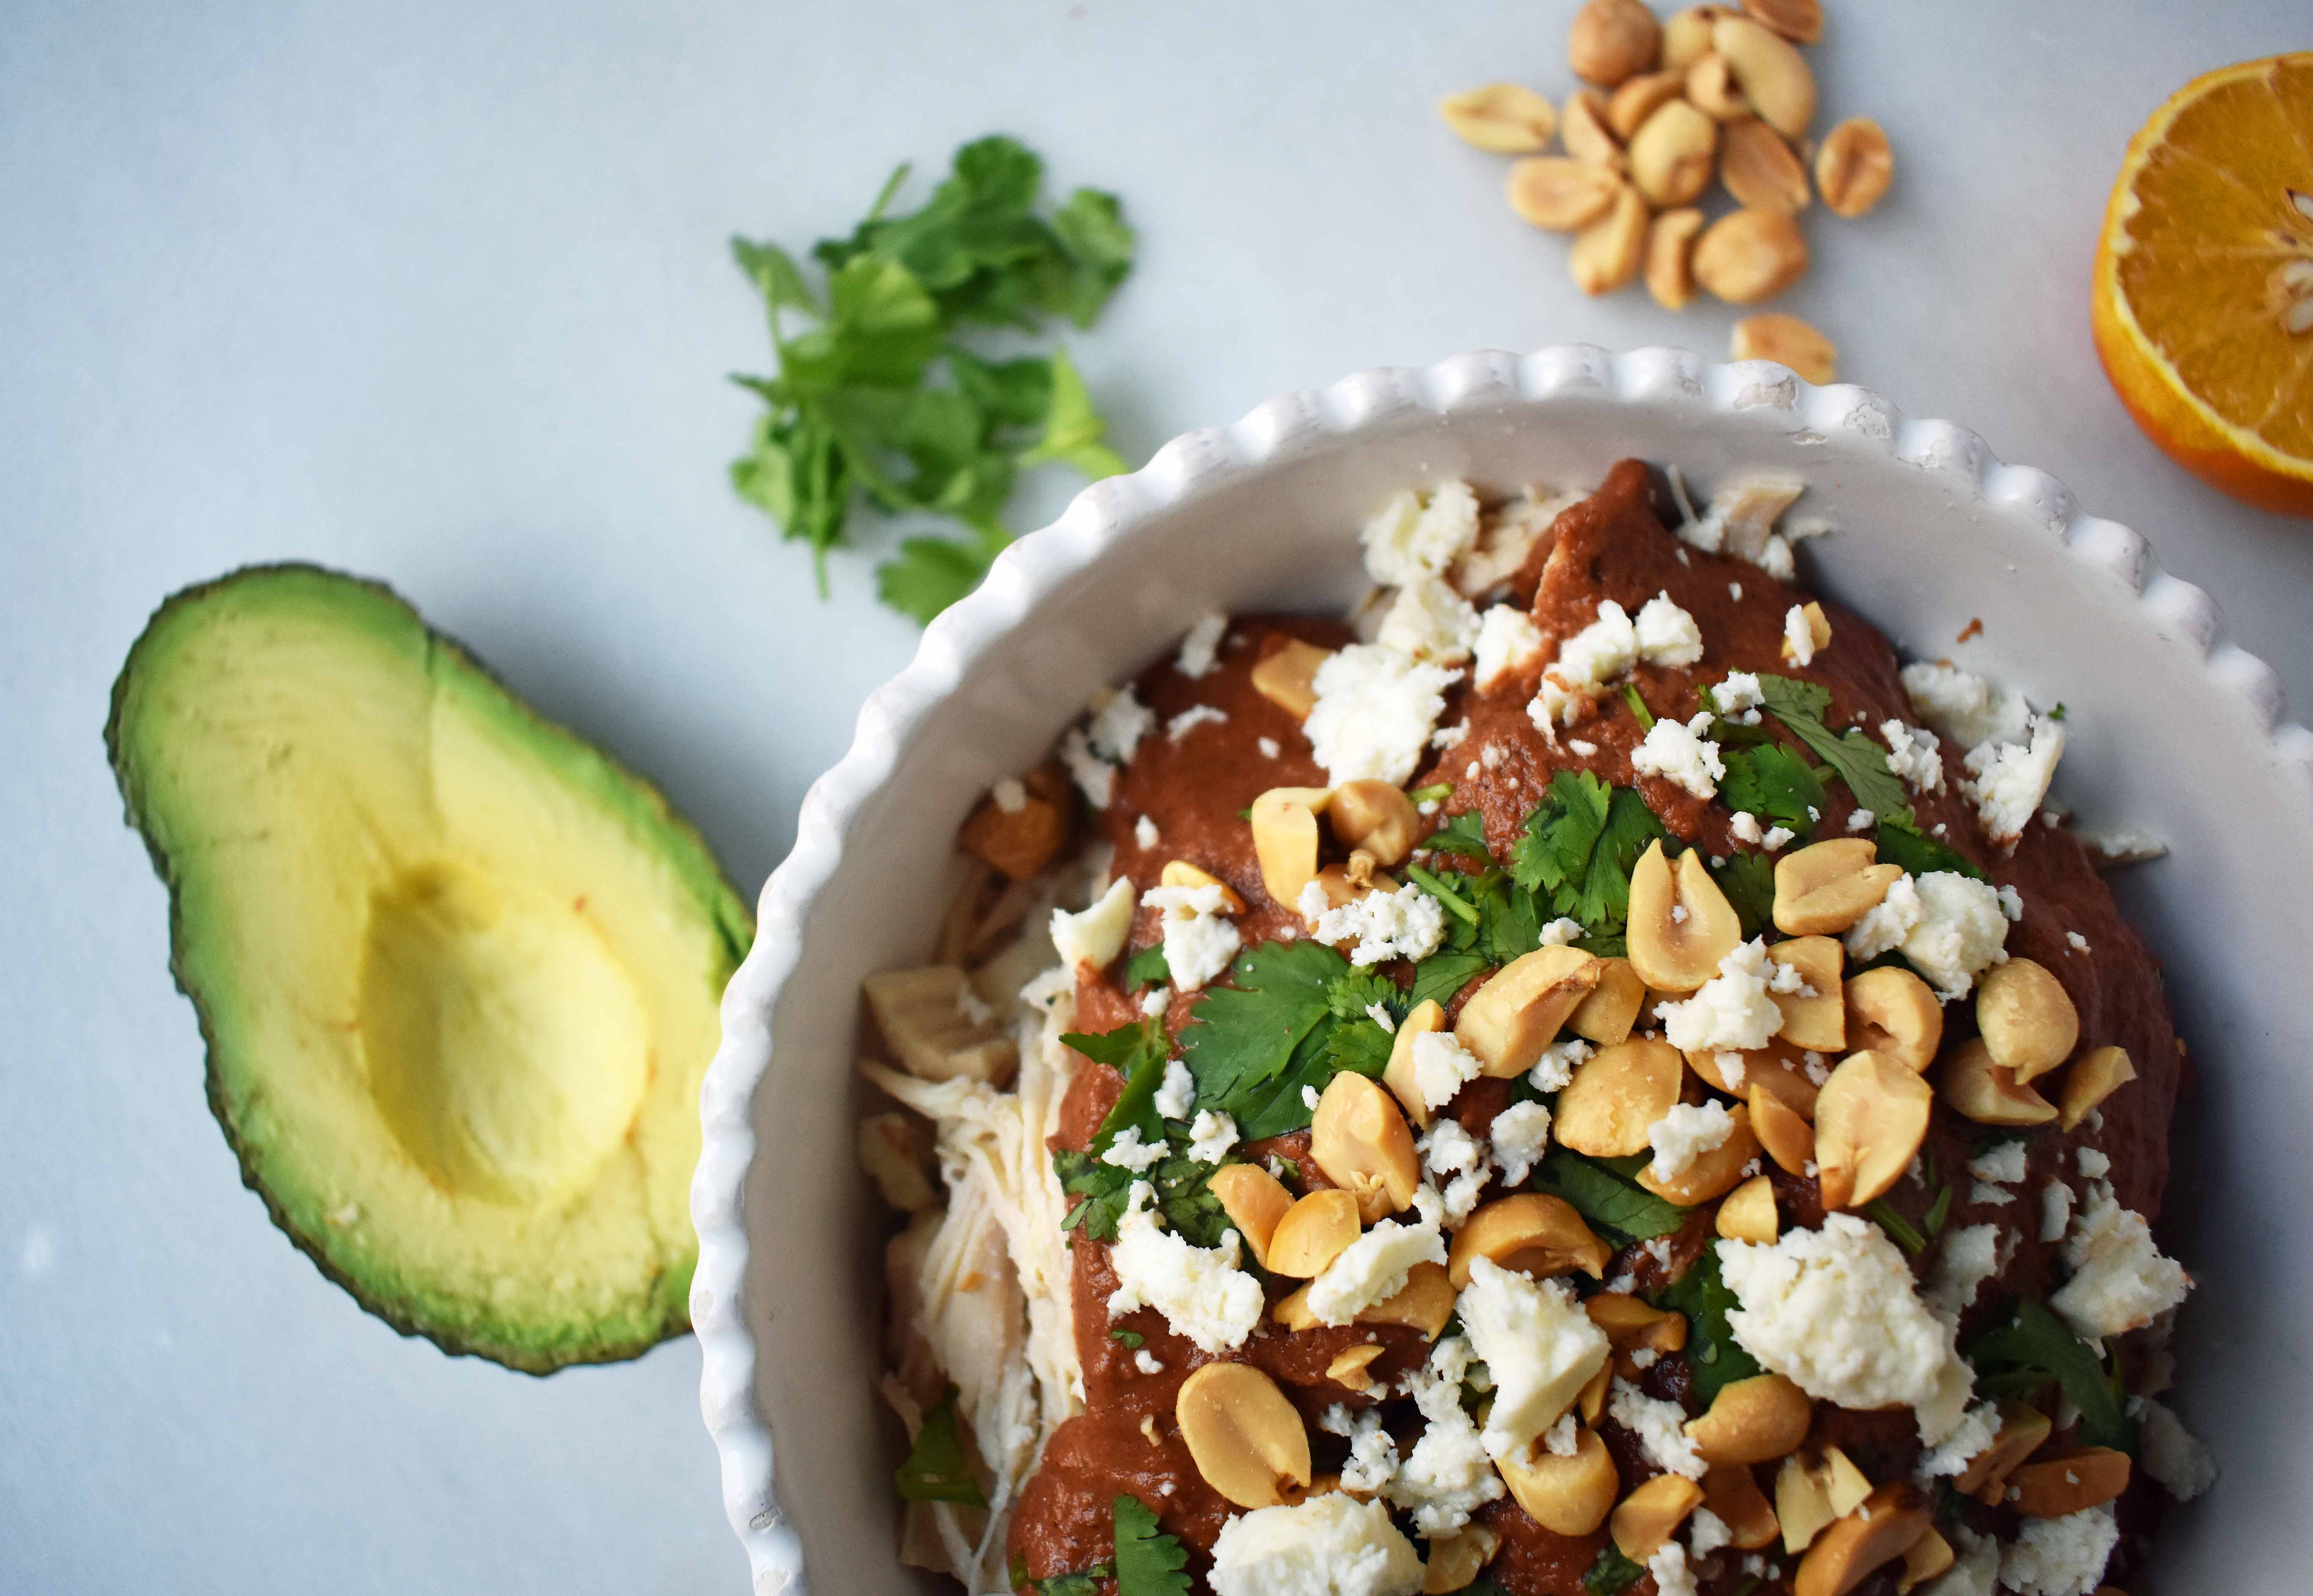 Crockpot Mexican Chicken Mole. Rich mole made easy in a slow cooker. Tender chicken covered in a rich, spiced, flavorful mole sauce. Can be made into chicken mole tacos by placing inside corn tortillas and topping with queso fresco, cilantro, white onion, and avocado. An easy crockpot dinner!